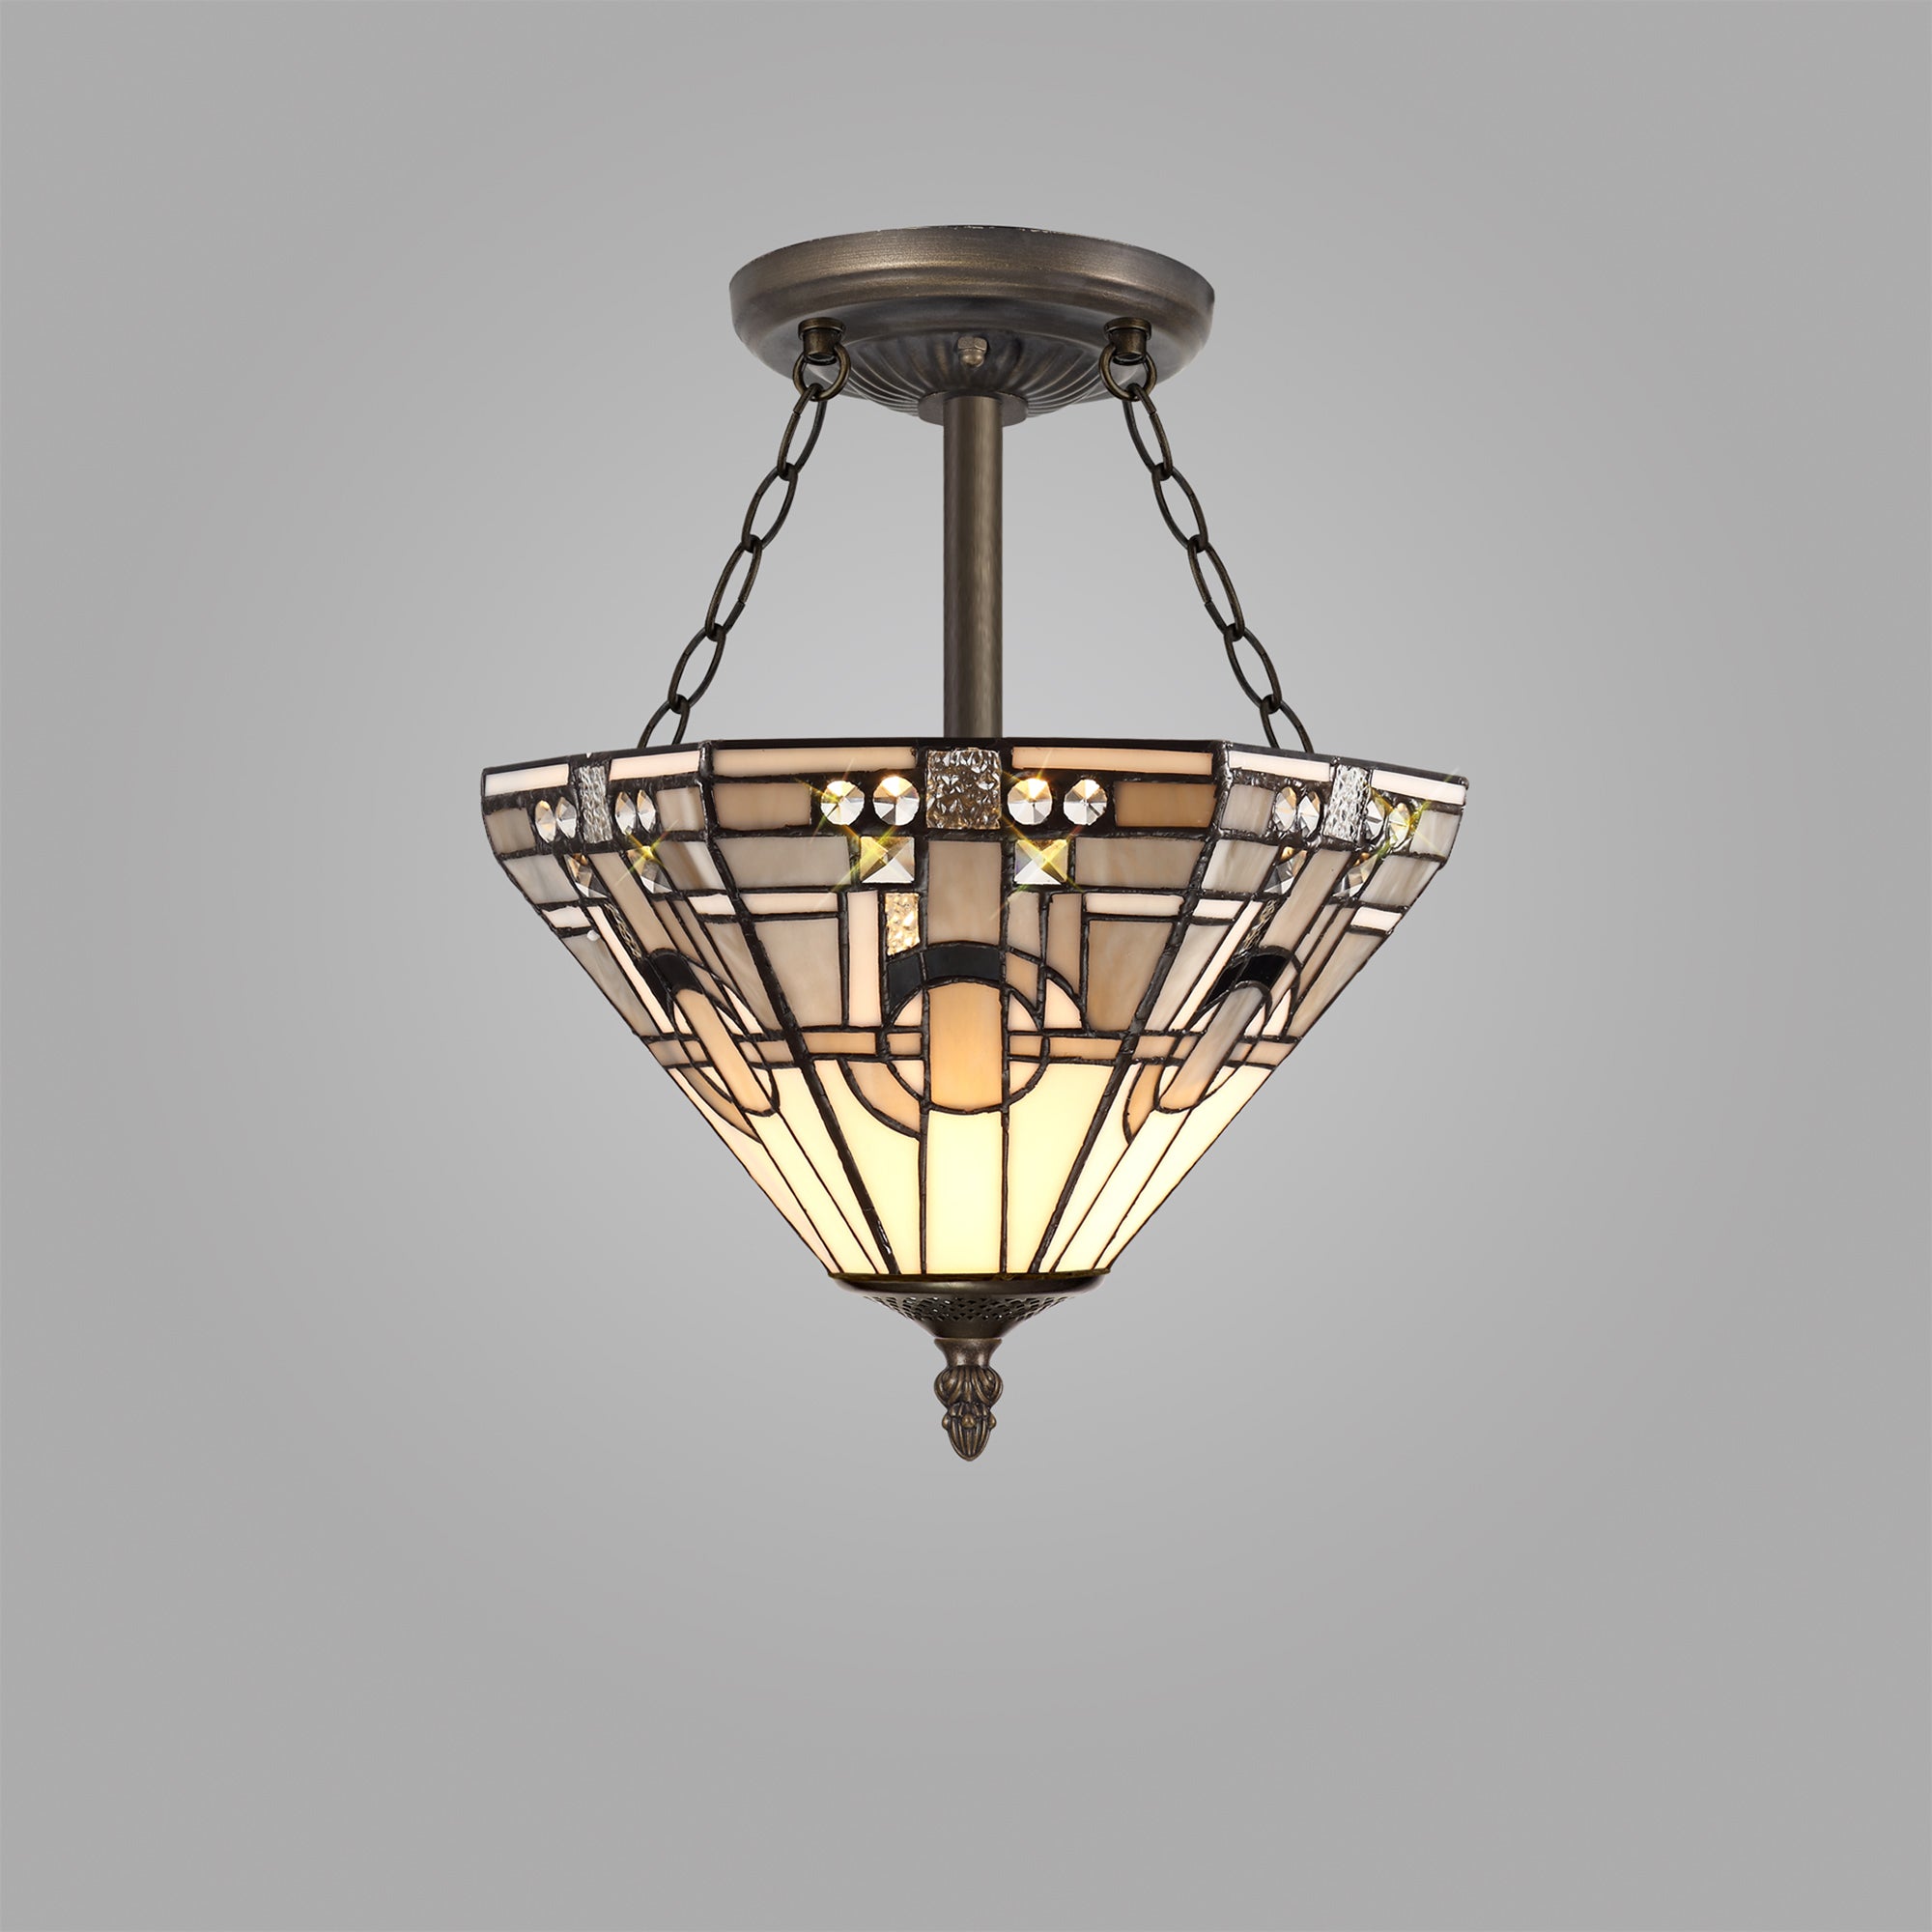 Atek 3 Light E27 Semi Ceiling With Tiffany Shade 30cm Shade, White/Grey/Black/Clear Crystal/Aged Antique Brass